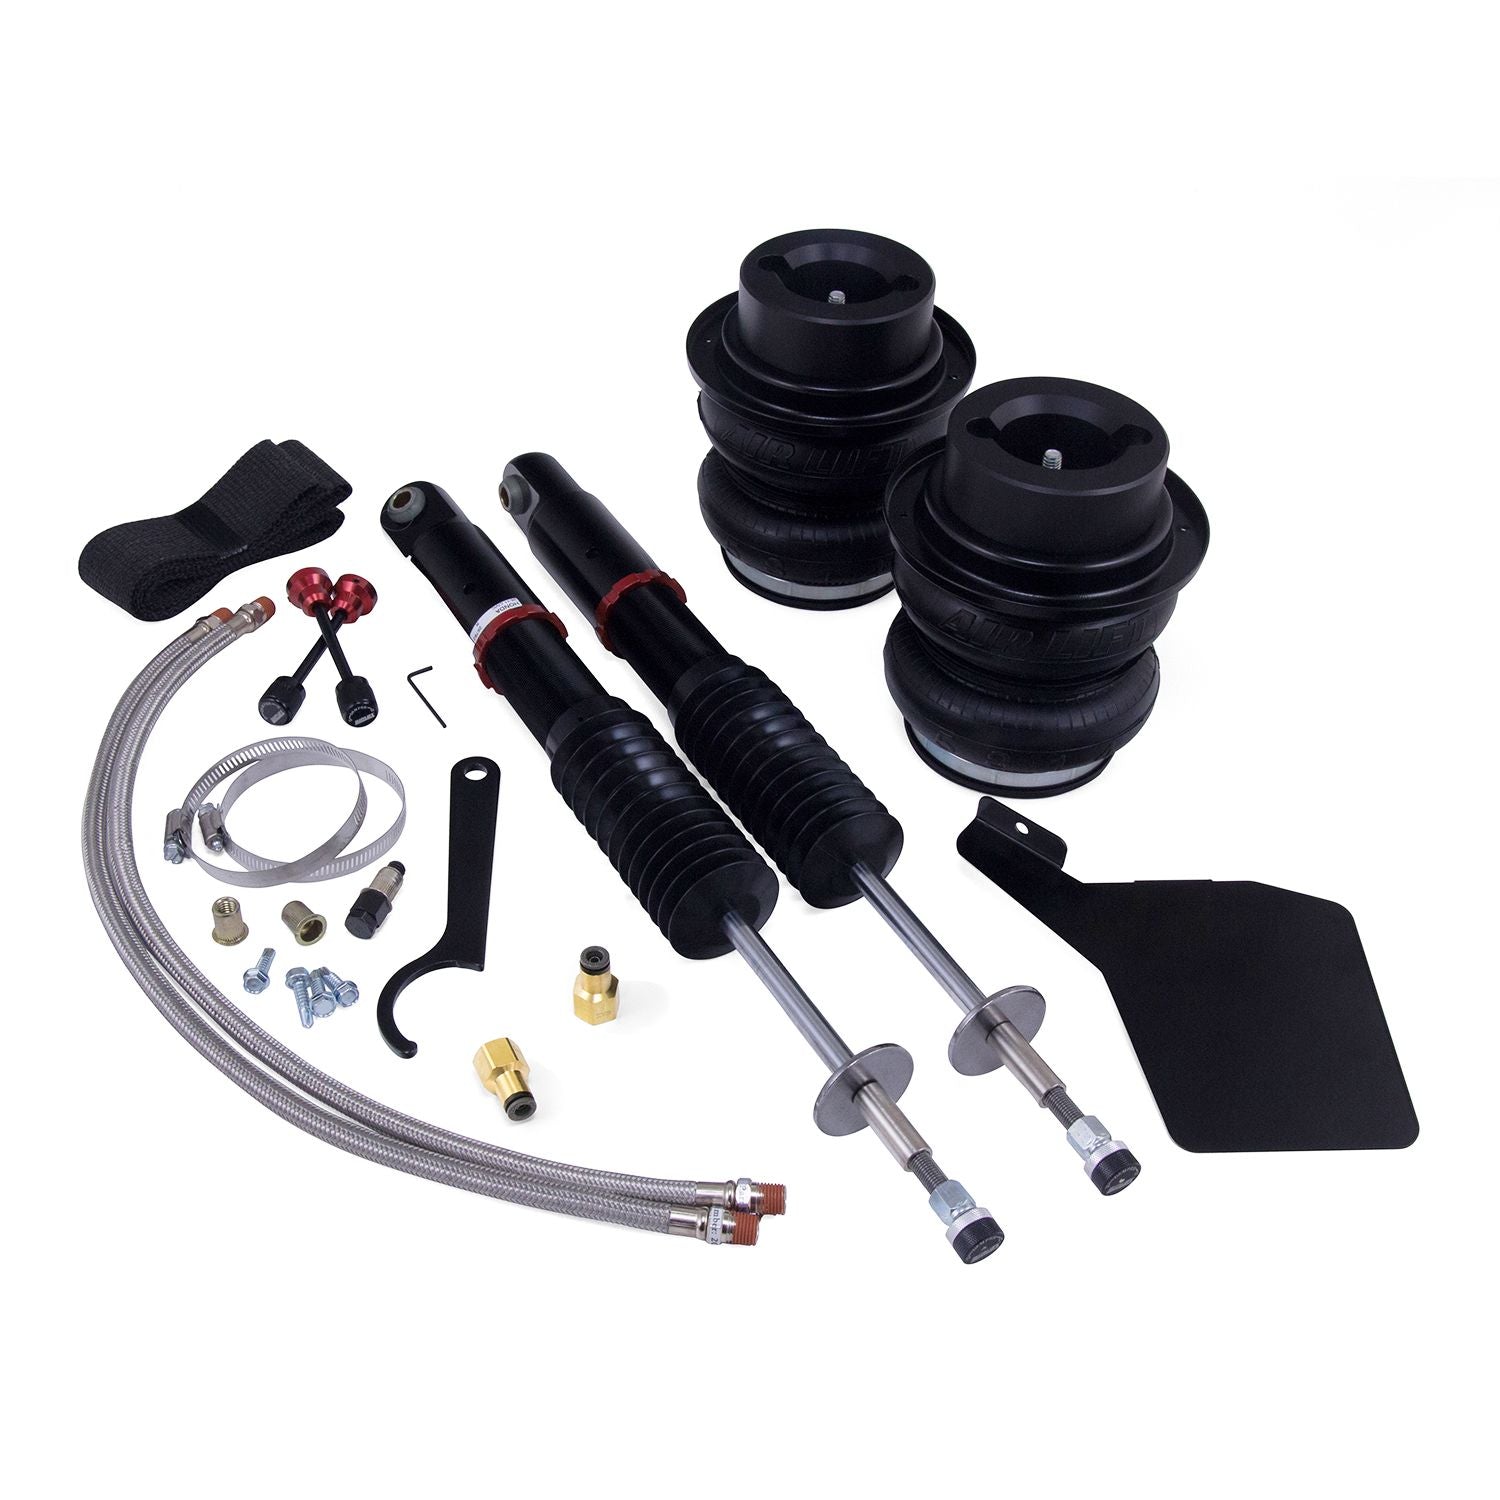 Get your 8th Gen Honda Civic low without sacrificing ride quality. Air Lift Performance air spring suspension gives you maximum drop with superior handling a sharp steering response and a comfortable ride.